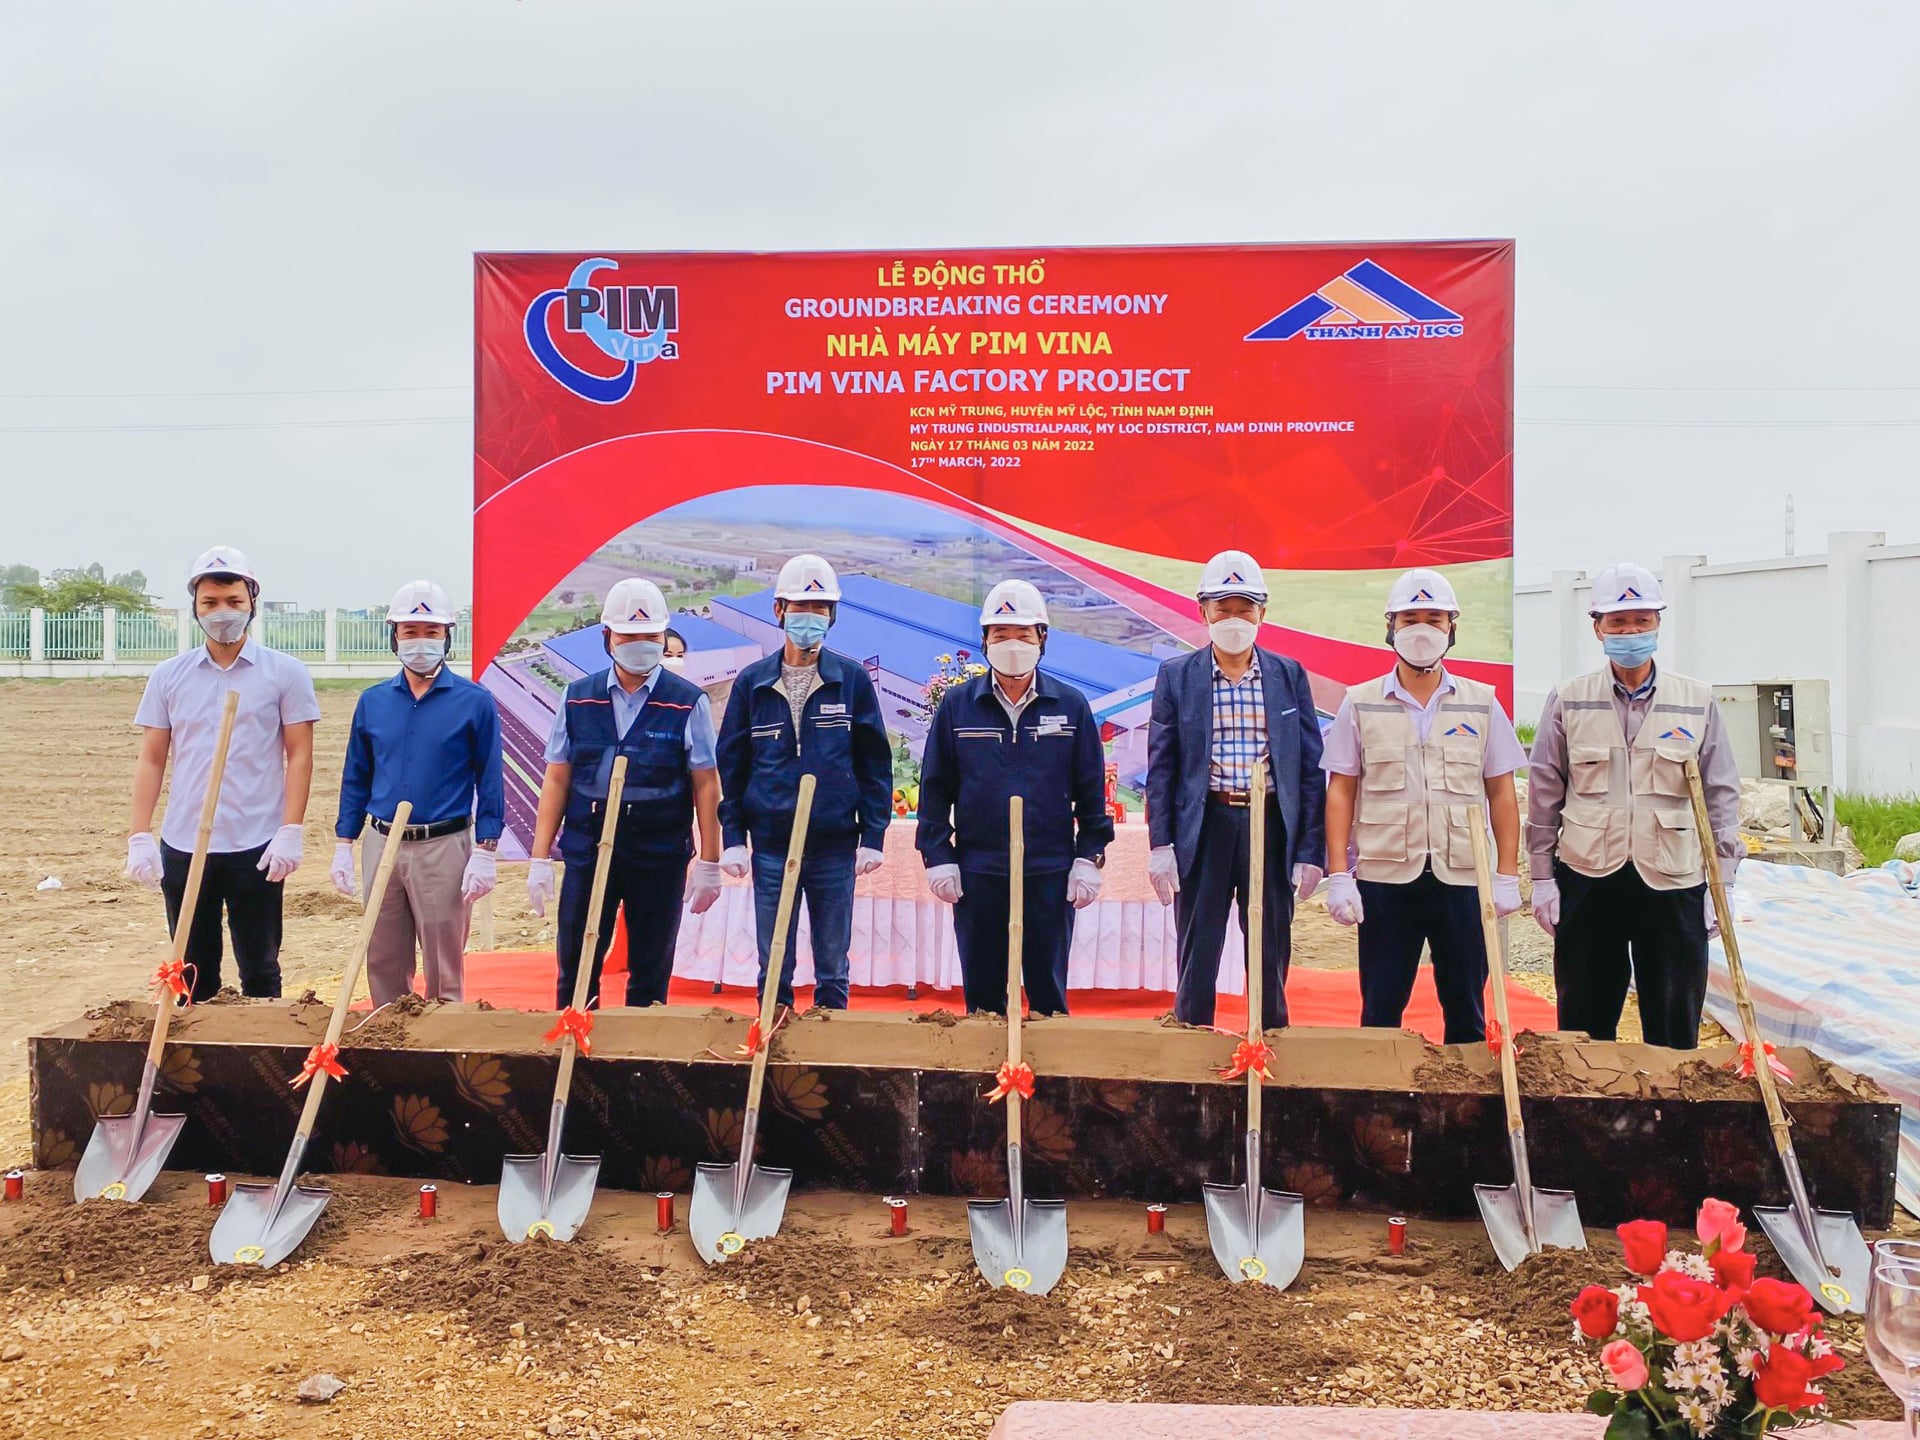 Thanh An ICC SOLEMLY HELD THE GROUNDBREAKING CEREMONY OF PIM VINA PROJECT